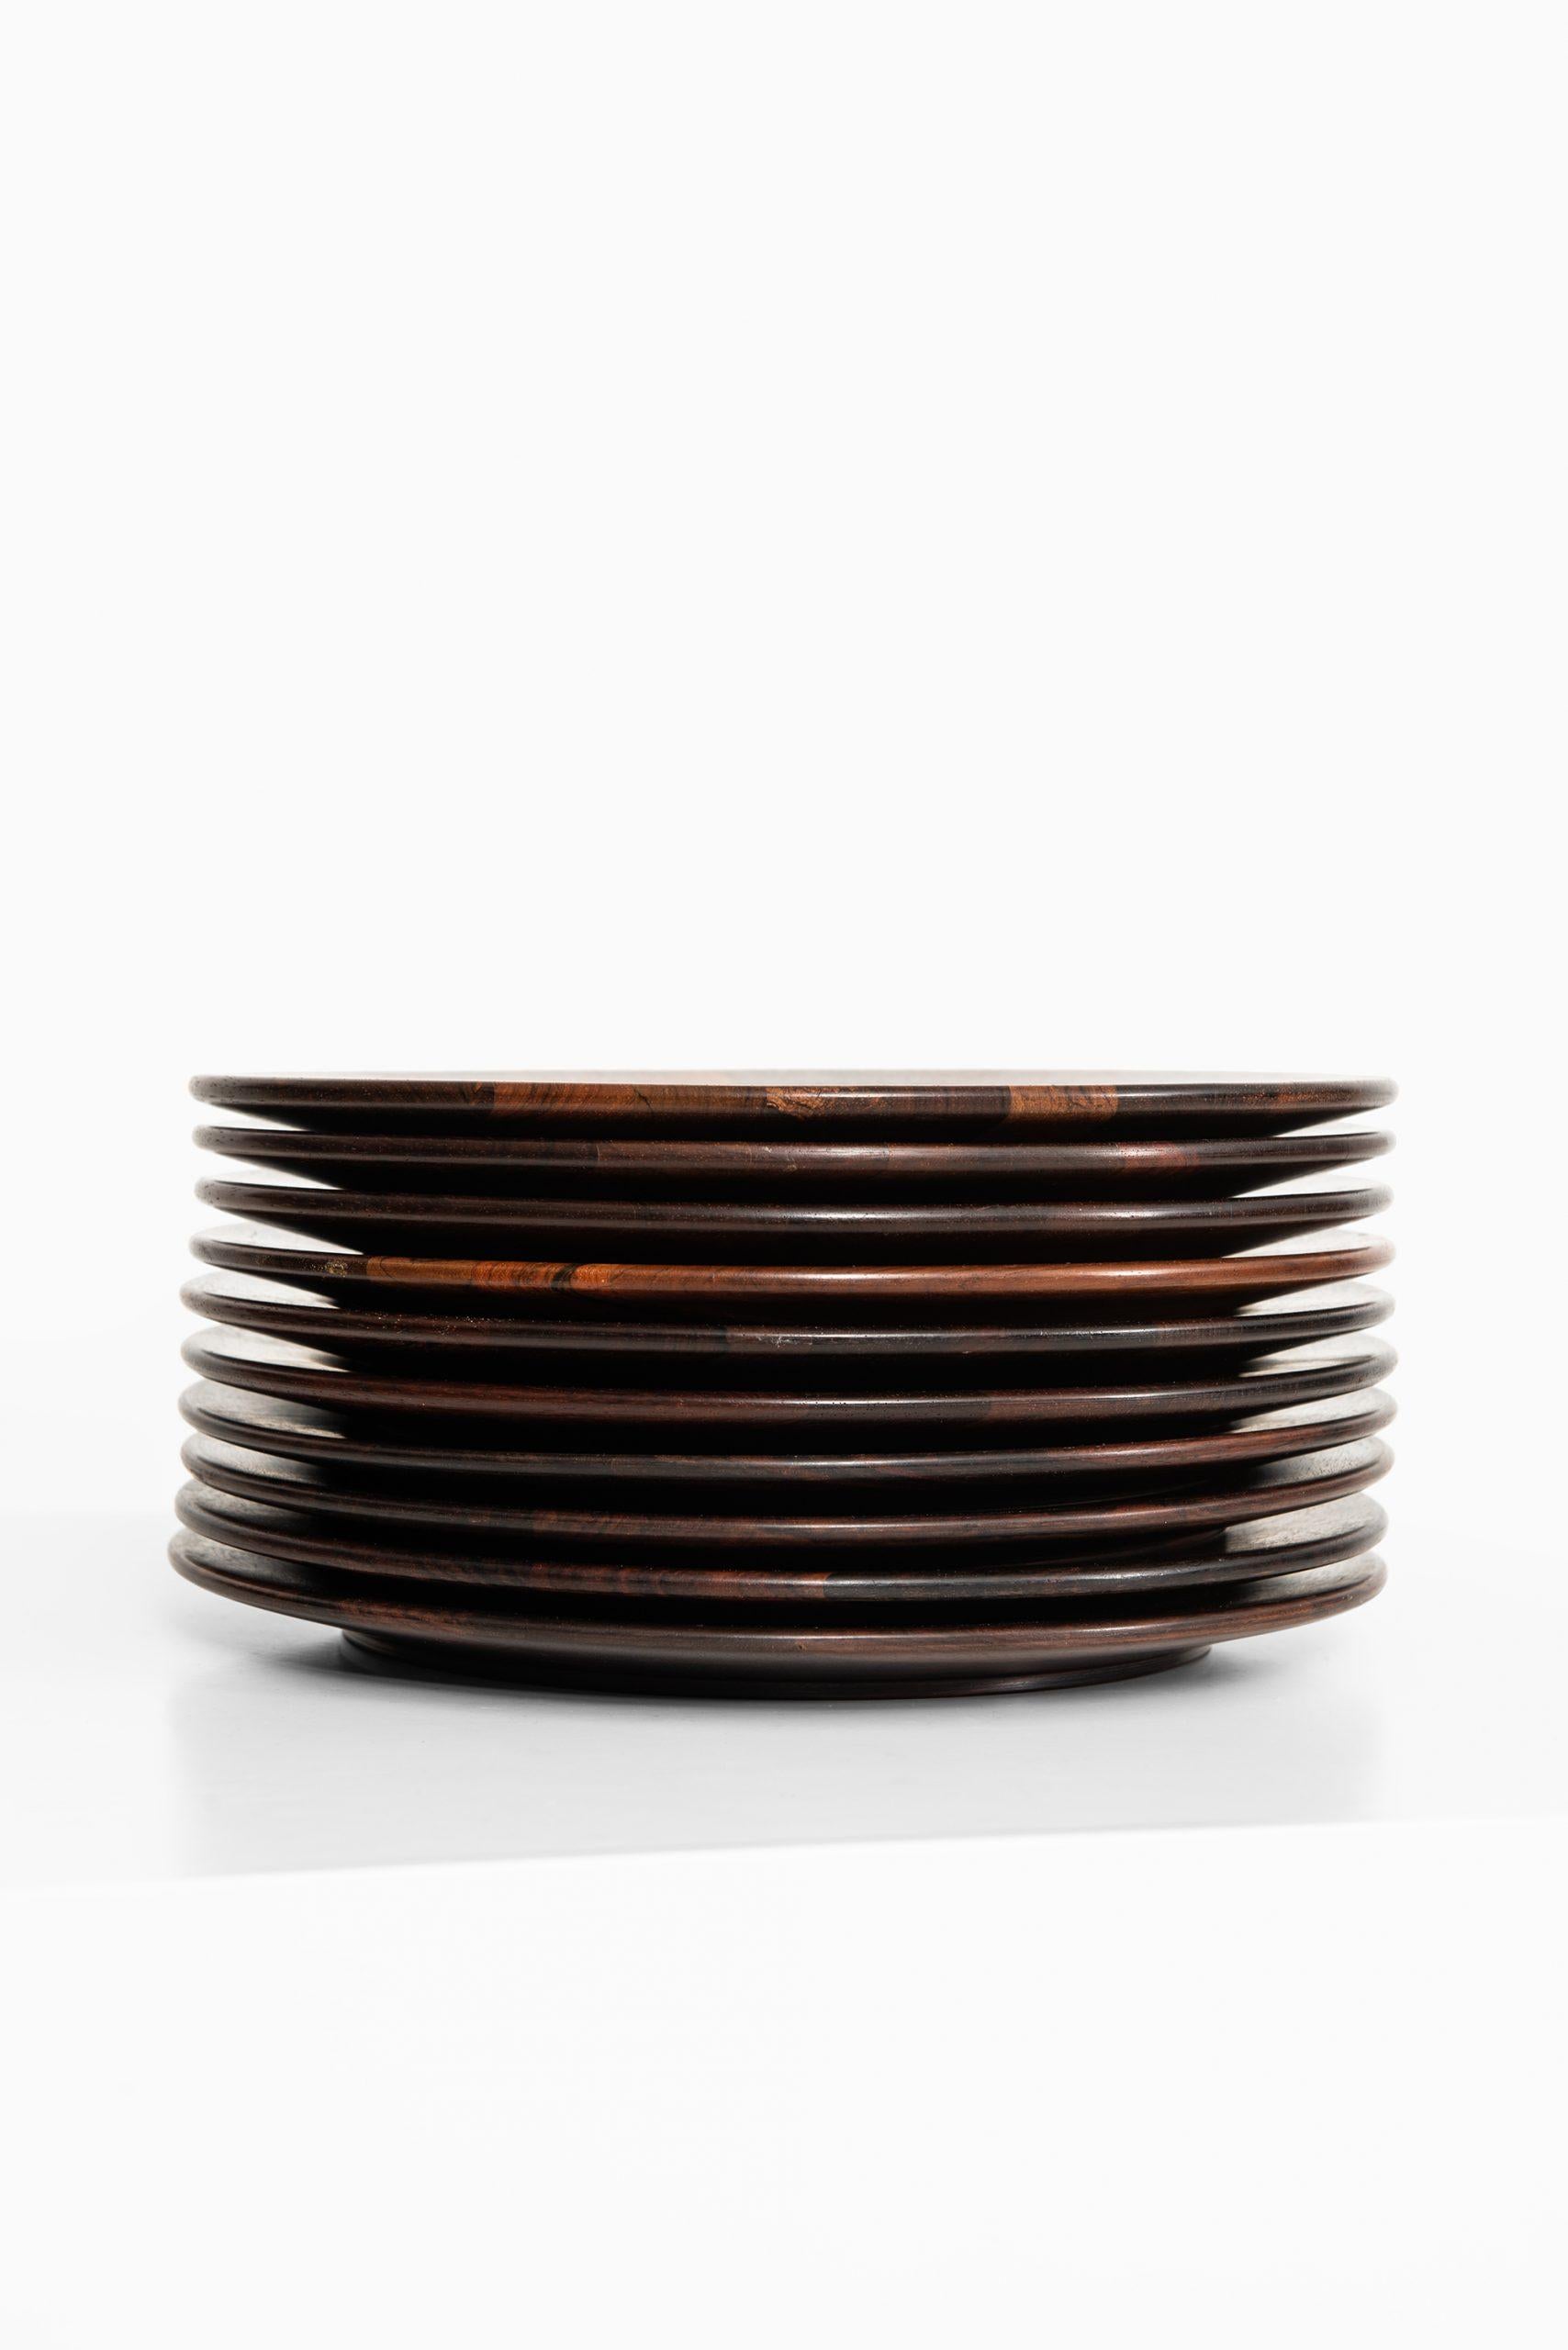 Set of 10 coaster plates attributed to Jens Quistgaard. Produced in Denmark.